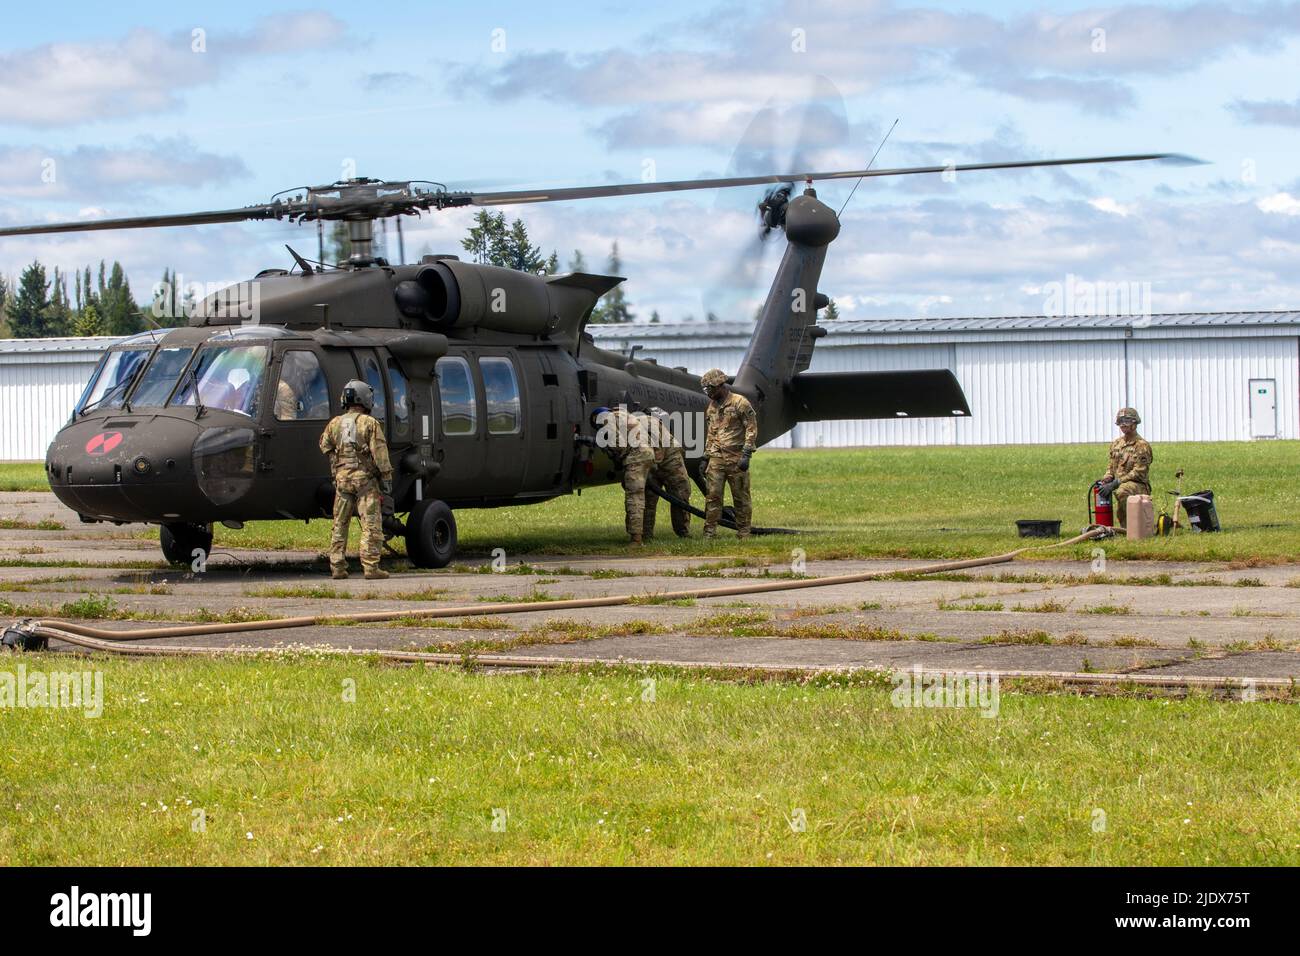 Soldiers assigned to Alpha Company, 46th Aviation Support Battalion, 16th Combat Aviation Brigade, operate a forward arming and refueling point at the Chehalis-Centralia Airport, Wash. on Jun. 22, 2022. The Soldiers were training U.S. Army Reserve and U.S. Air Force servicemembers on helicopter refueling procedures. (U.S. Army photo by Capt. Kyle Abraham, 16th Combat Aviation Brigade) Stock Photo